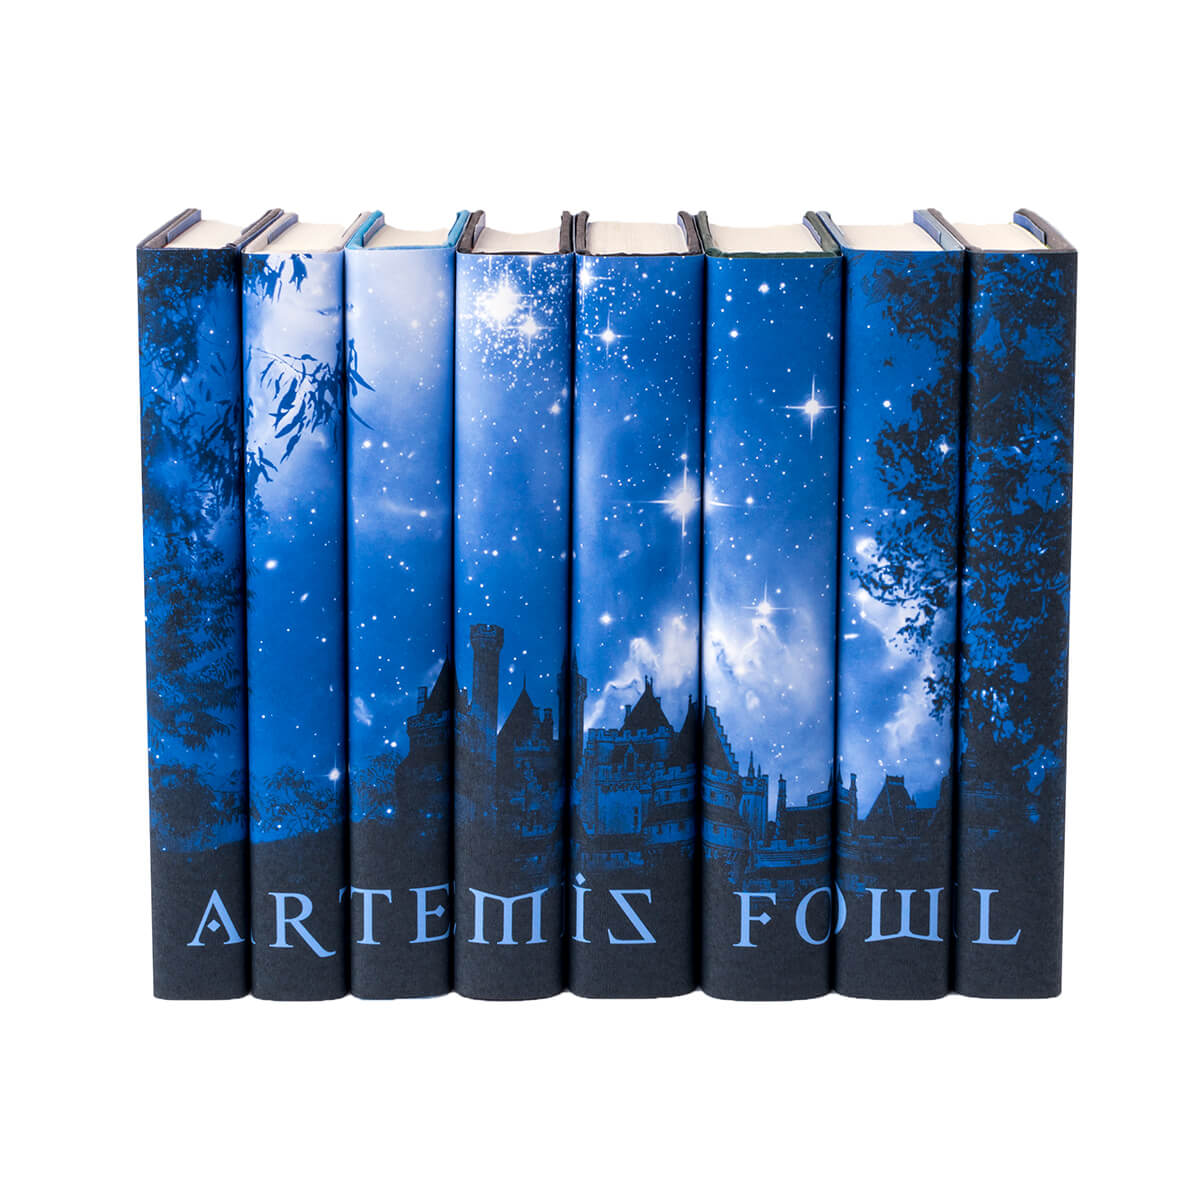 Our custom Jackets Only for the thrilling eight-novel Artemis Fowl series by Eoin Colfer will transform your books, capturing the enchantment and mystique of the legendary series. A great gift for owners of the book set!